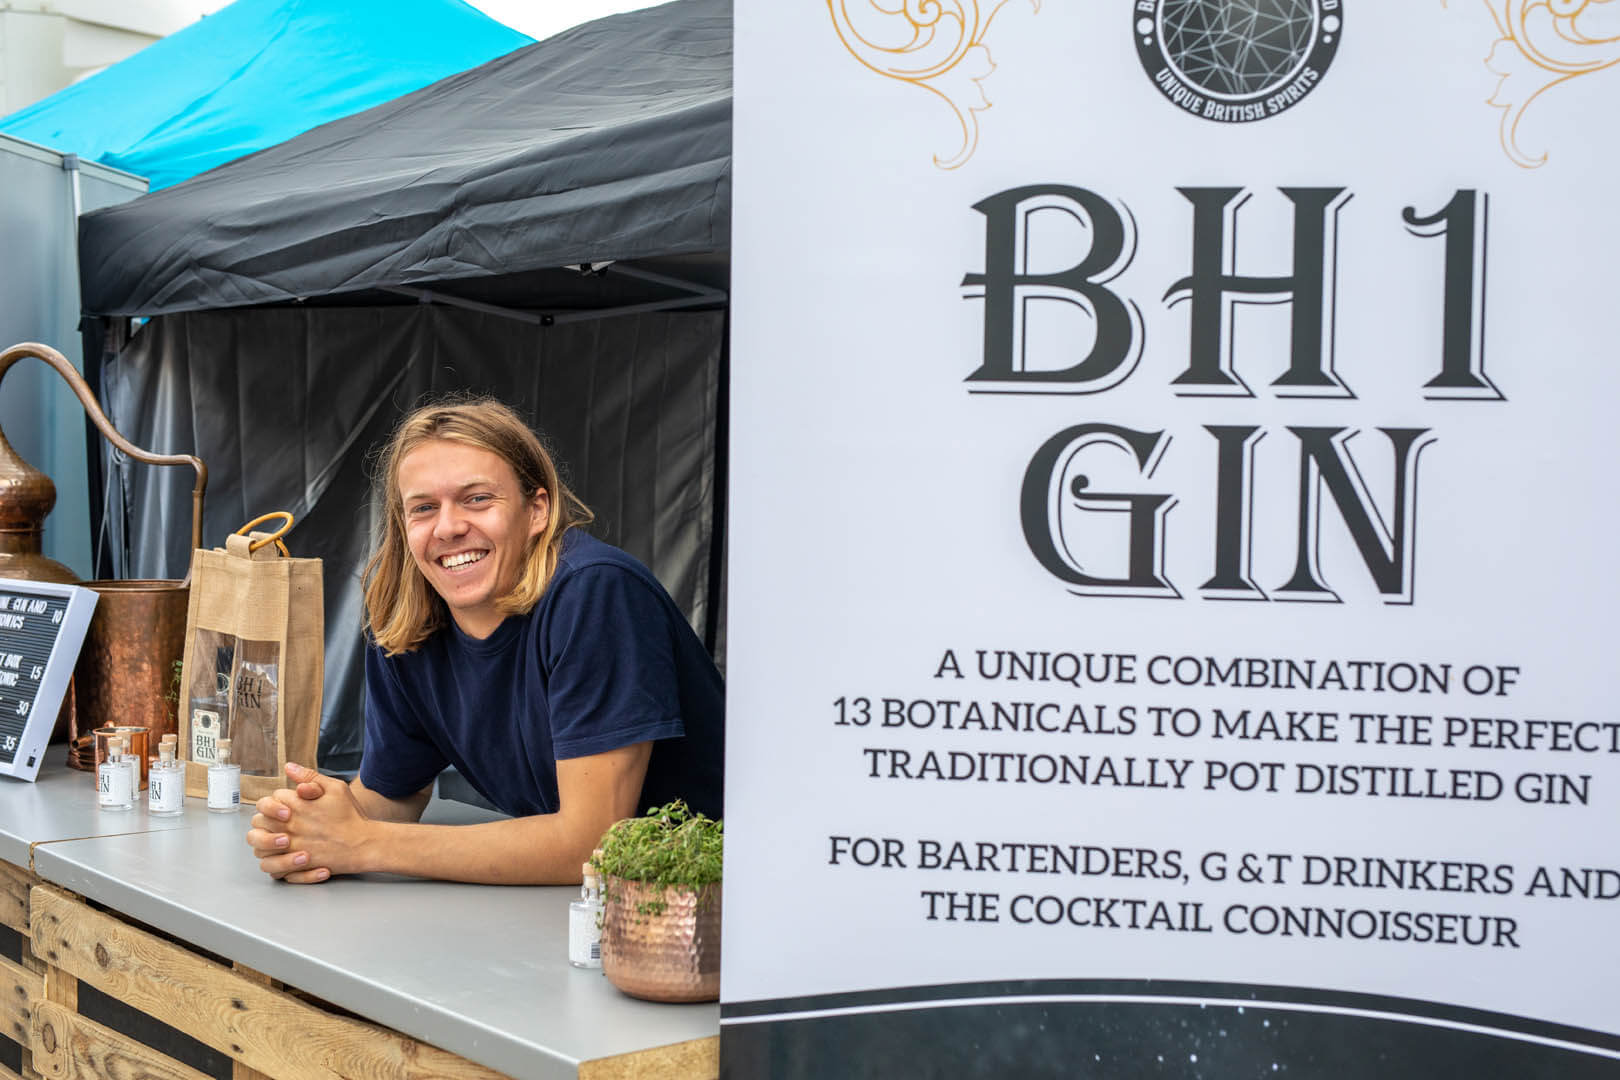 BH1 Gin trader smiling for the camera at his stall on the promenade